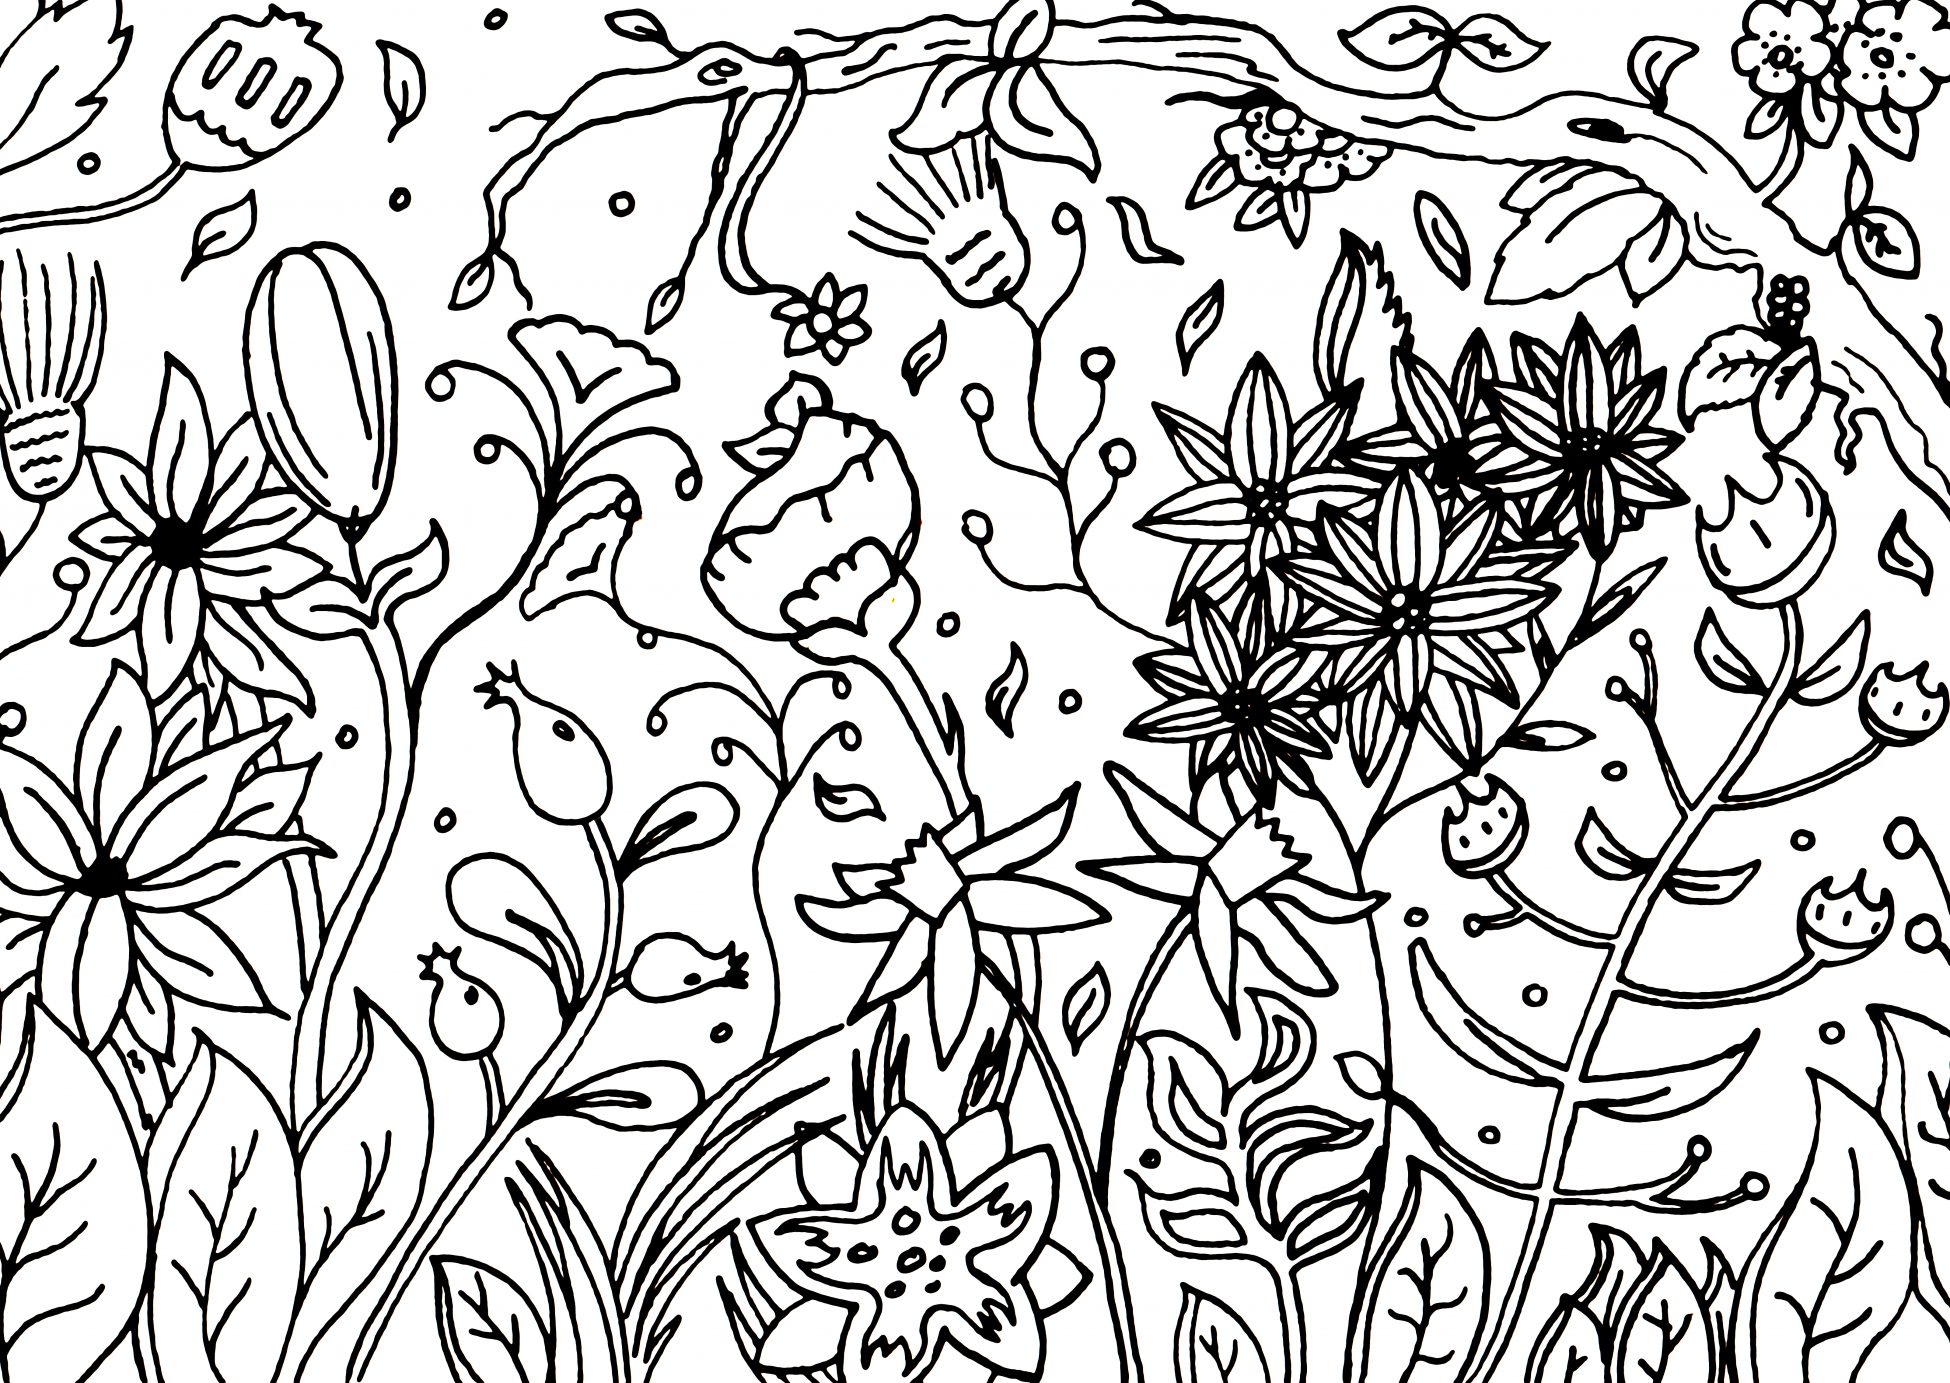 A hand illustrated postcard with black line drawings on a white background for the user to colour themselves. Various plants, flowers, vines and branches cover the page, growing closely together.